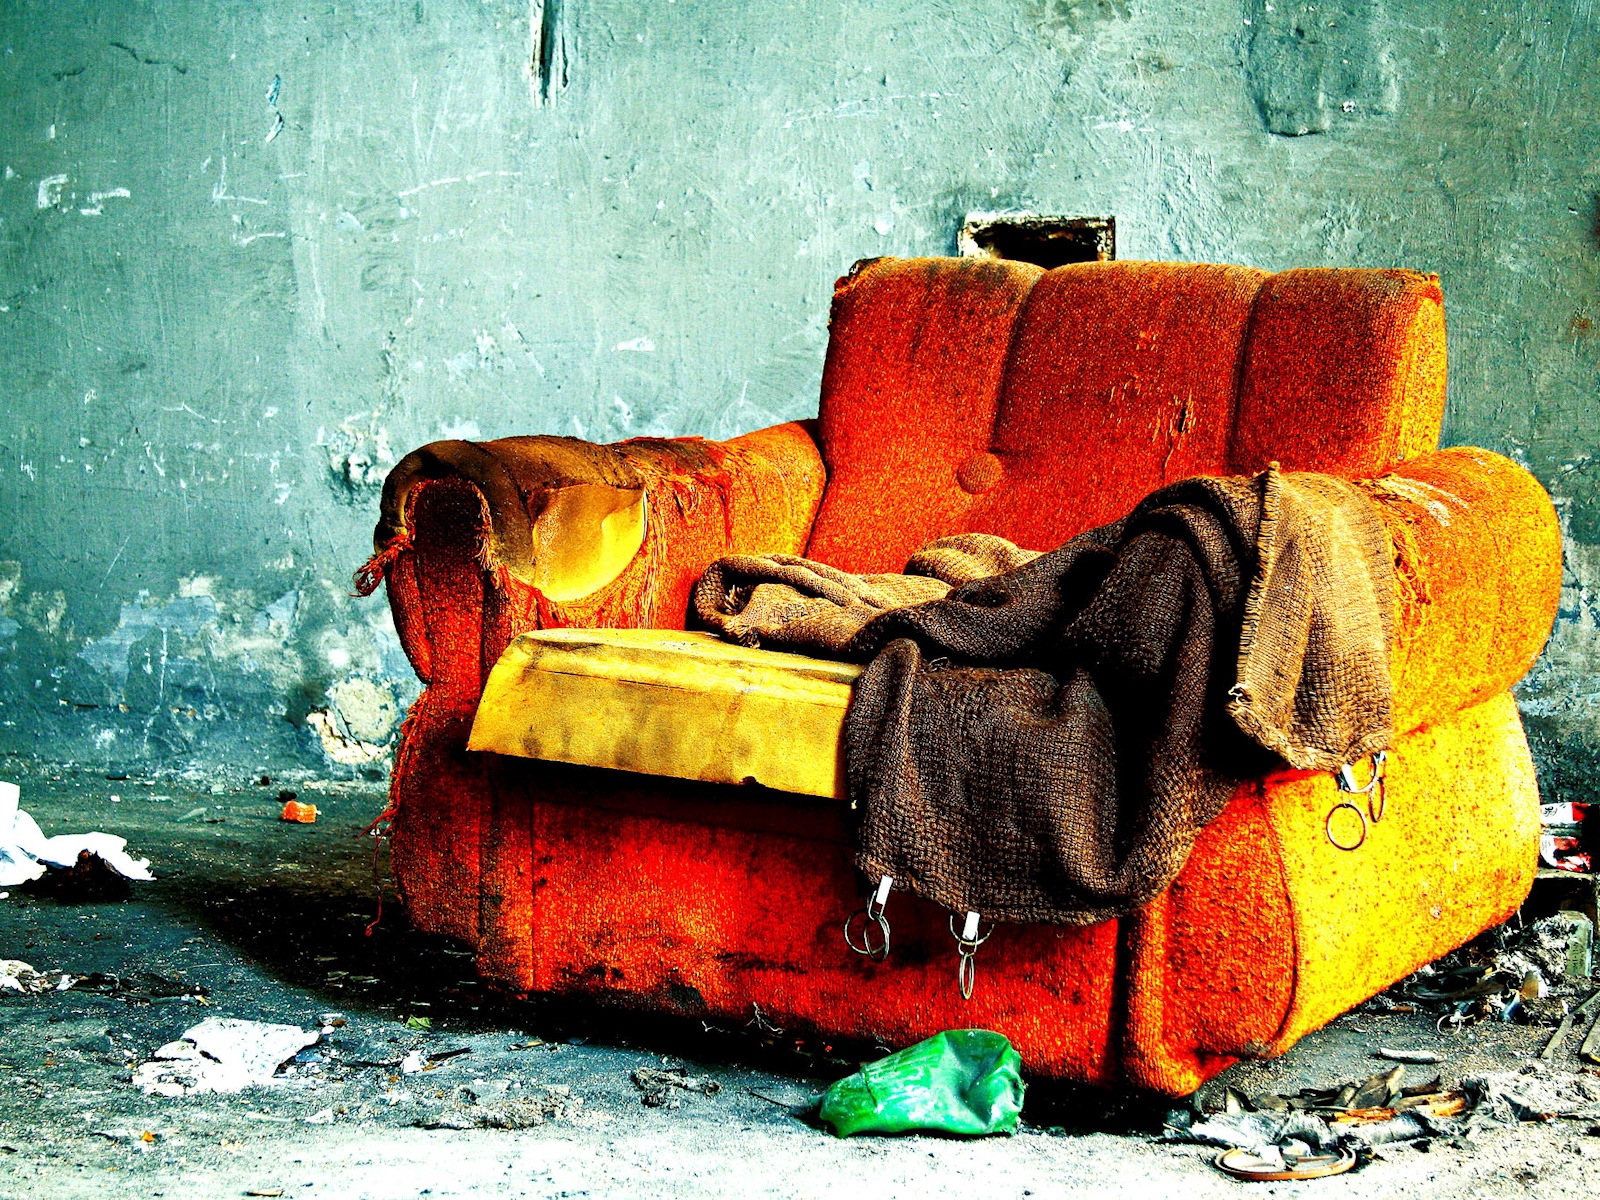 colourful, miscellanea, miscellaneous, old, colorful, armchair, ancient, ragged for android